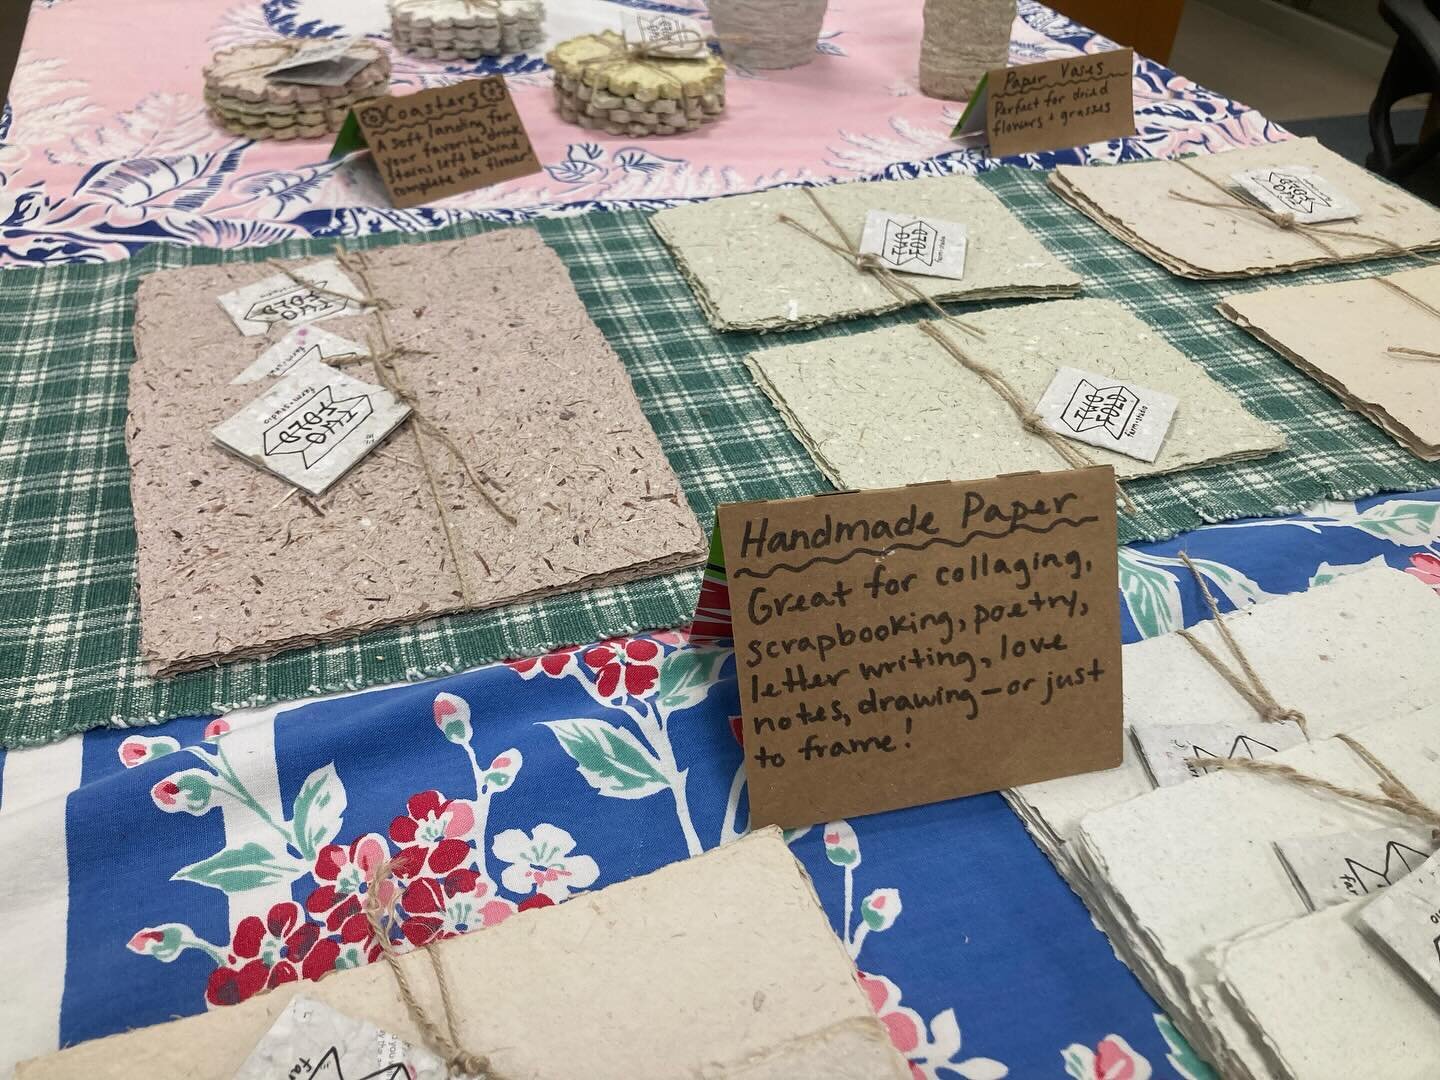 Catch us at the @abingtoncommunitylibrary holiday market today! We are here until 4:00pm with papers made from fennel, carrots, garlic and more!
#handmadepaper #nepaart #abingtoncommunitylibrary